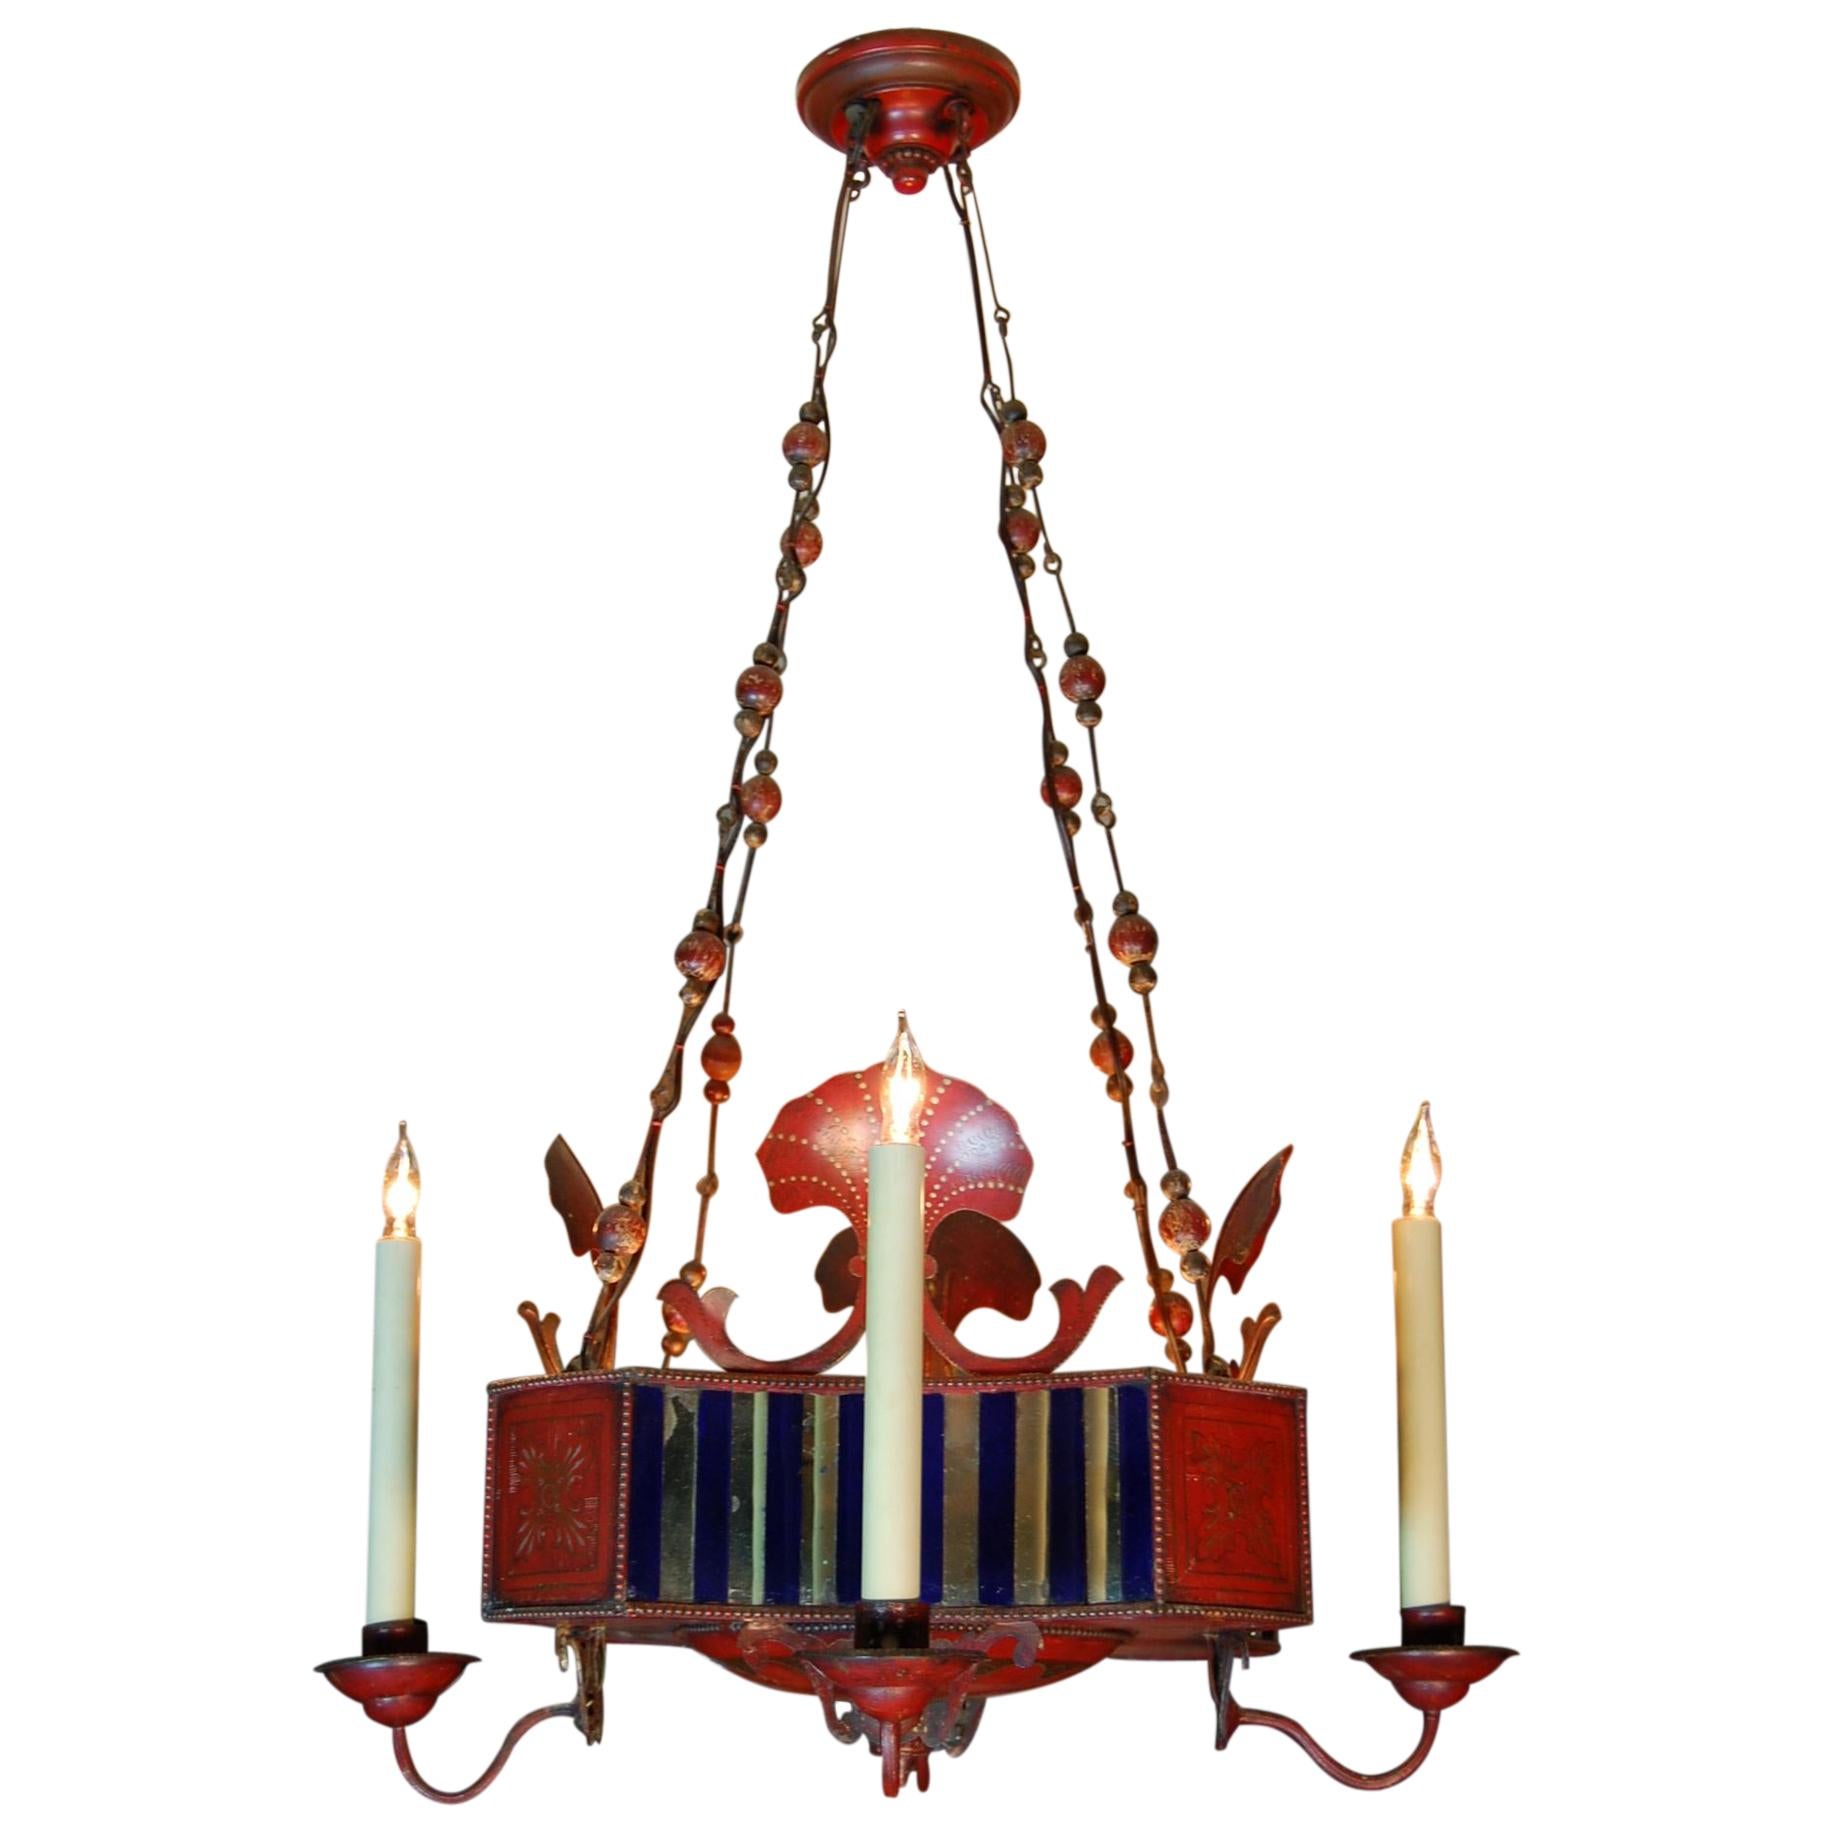 French Red Painted & Decorated Tole Chandelier with Mirrored Panels, circa 1900 For Sale